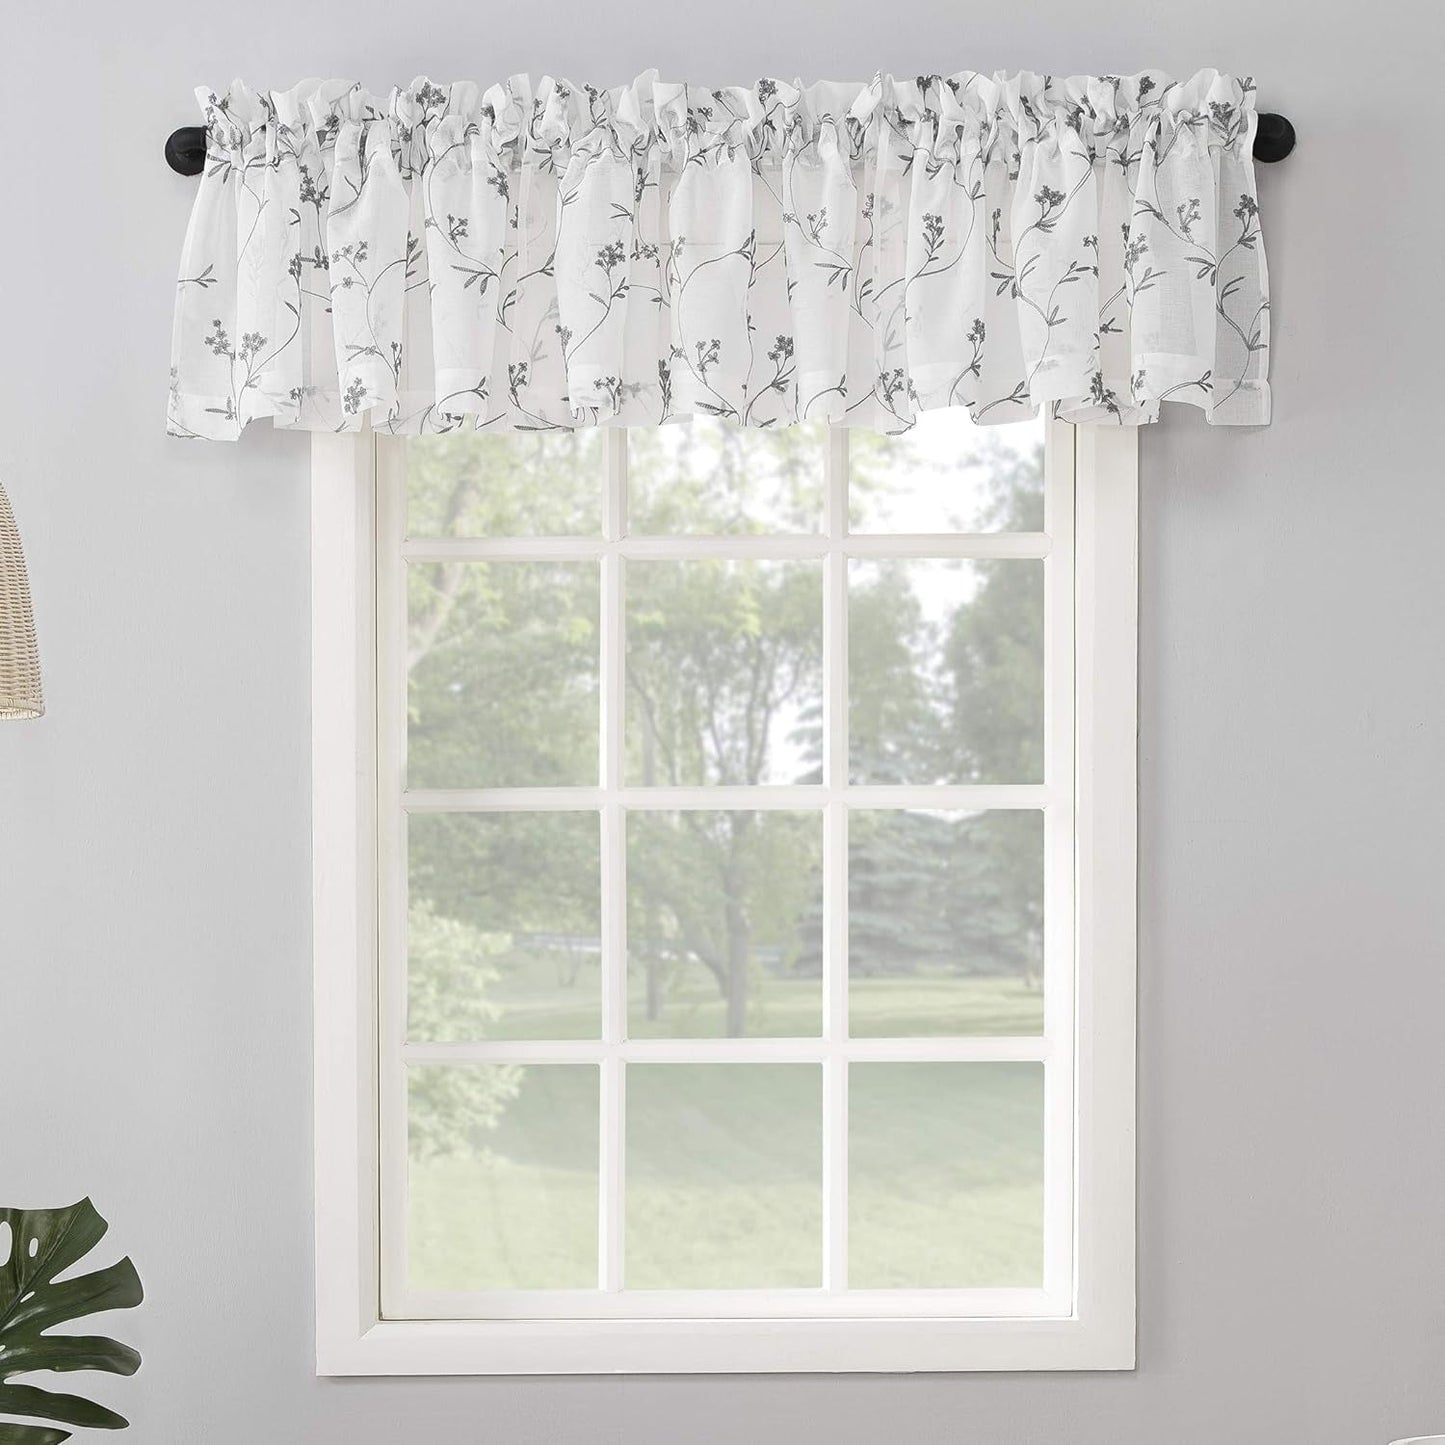 No. 918 Delia Embroidered Floral Sheer Rod Pocket Curtain Valance, 50" X 17", Ivory Off-White